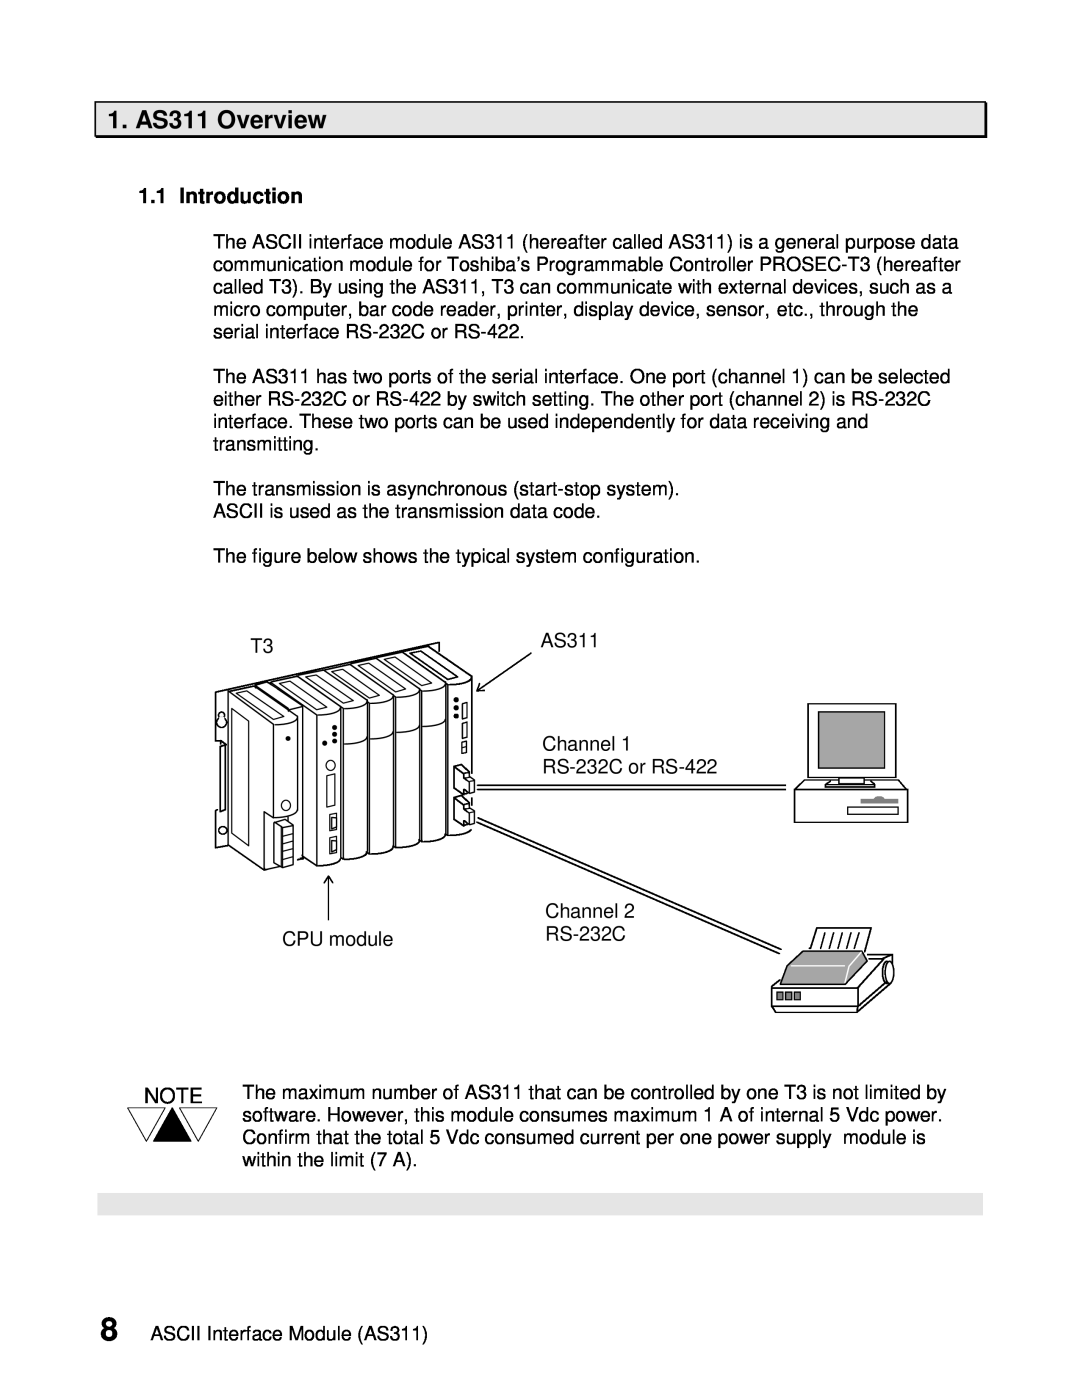 Toshiba user manual 1. AS311 Overview, Introduction 